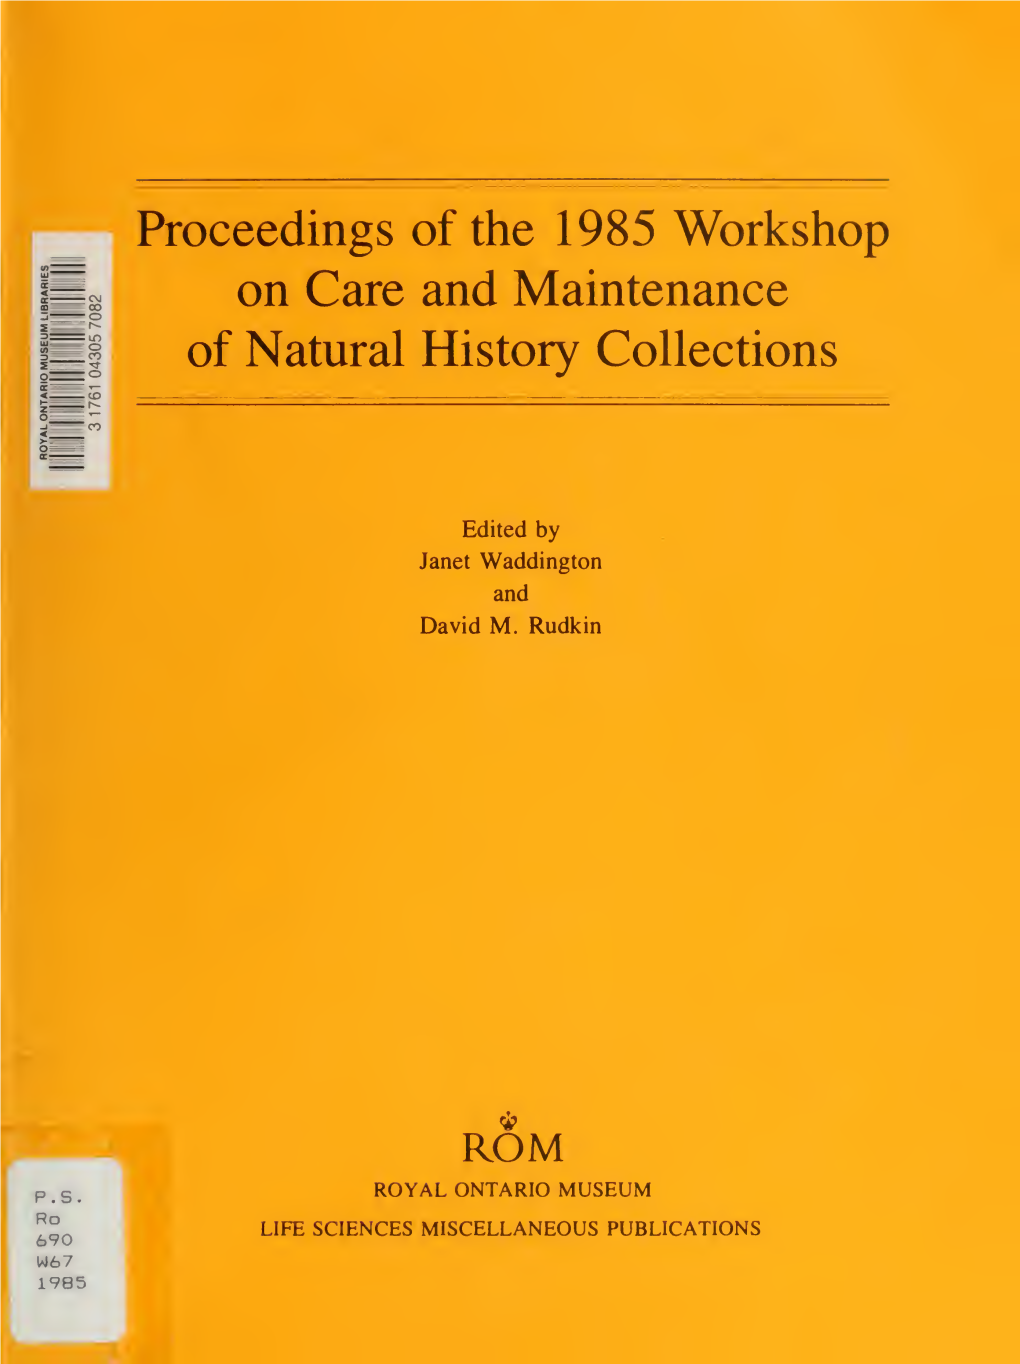 Proceedings of the 1985 Workshop on Care and Maintenance of Natural History Collections